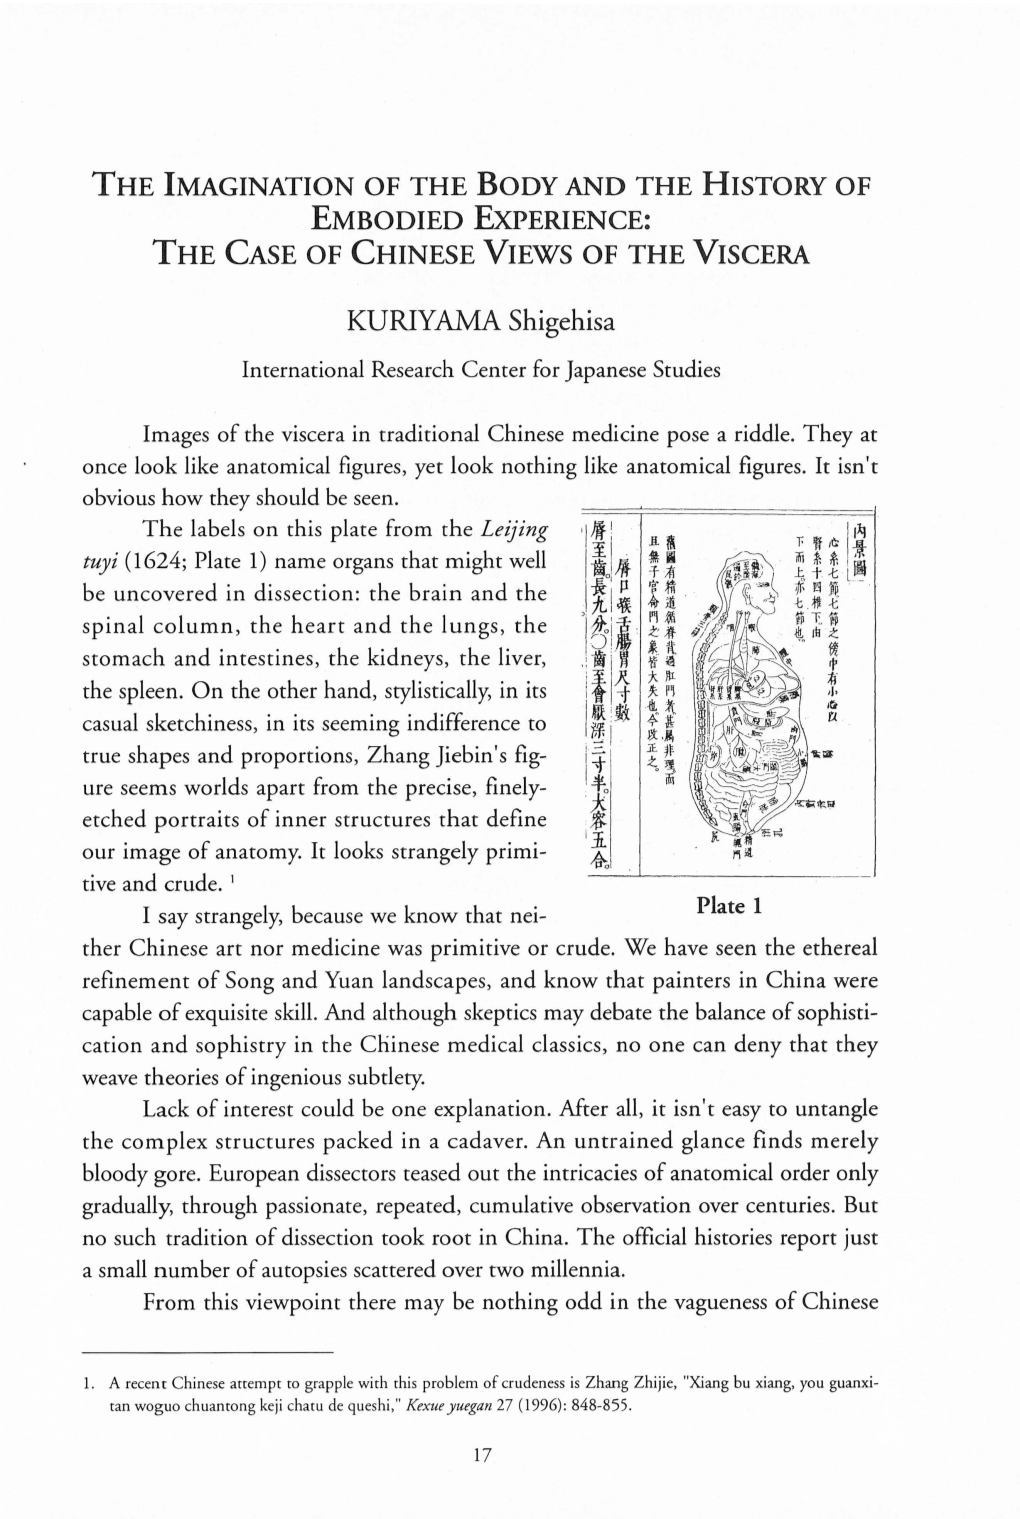 The Imagination of the Body and the History of Embodied Experience: the Case of Chinese Views of the Viscera